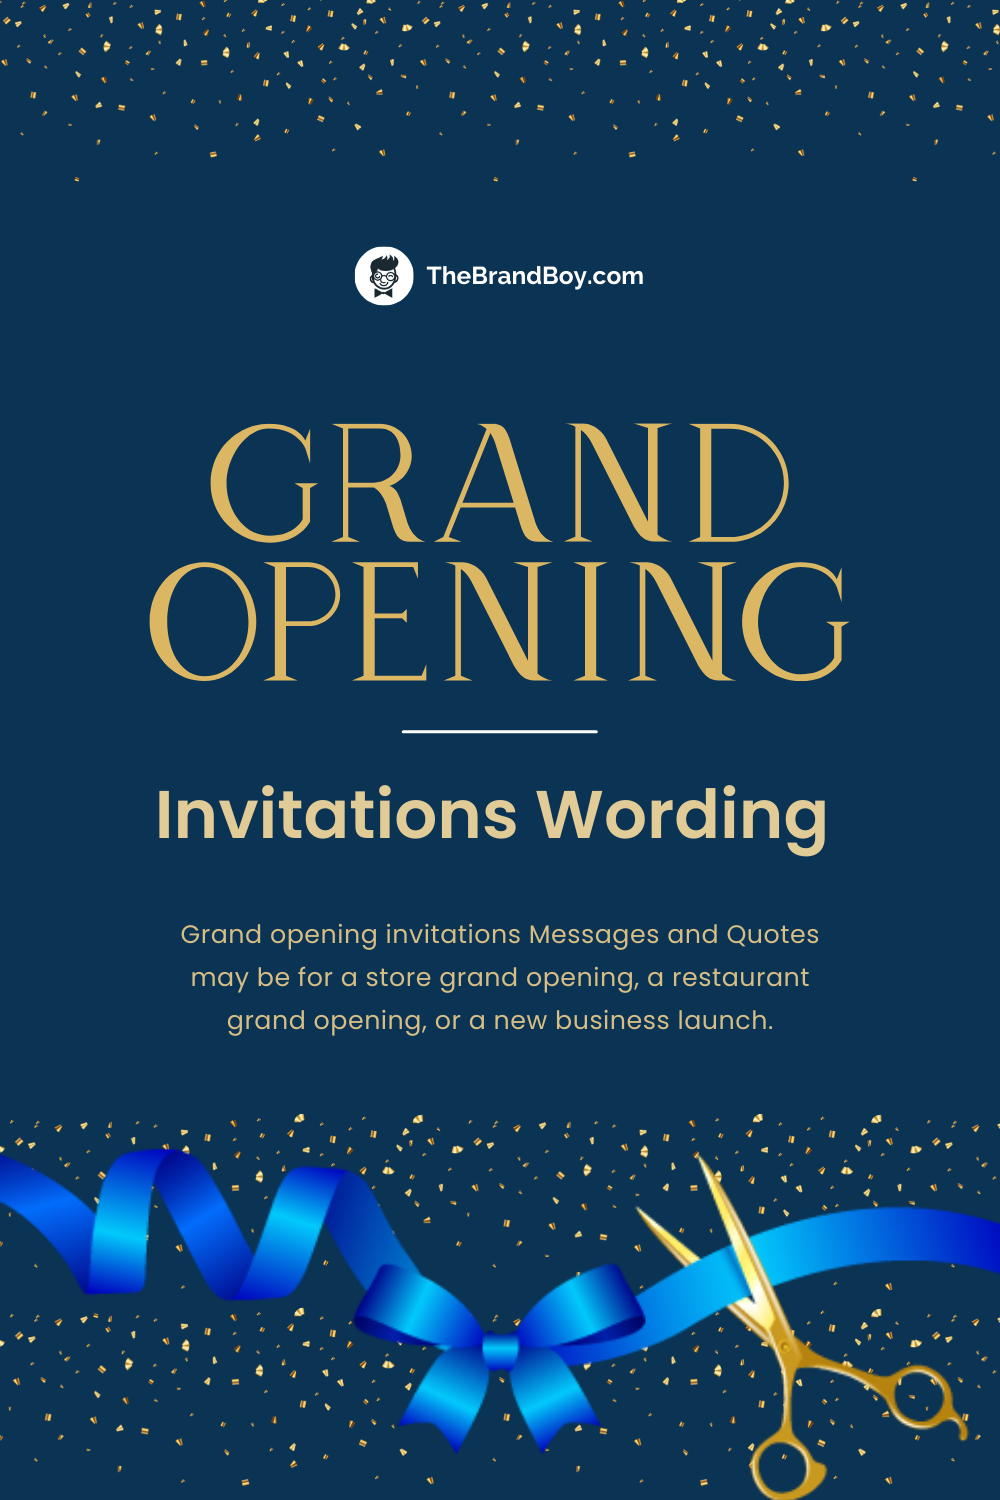 242+ Top Grand Opening Invitations Messages (Templates)